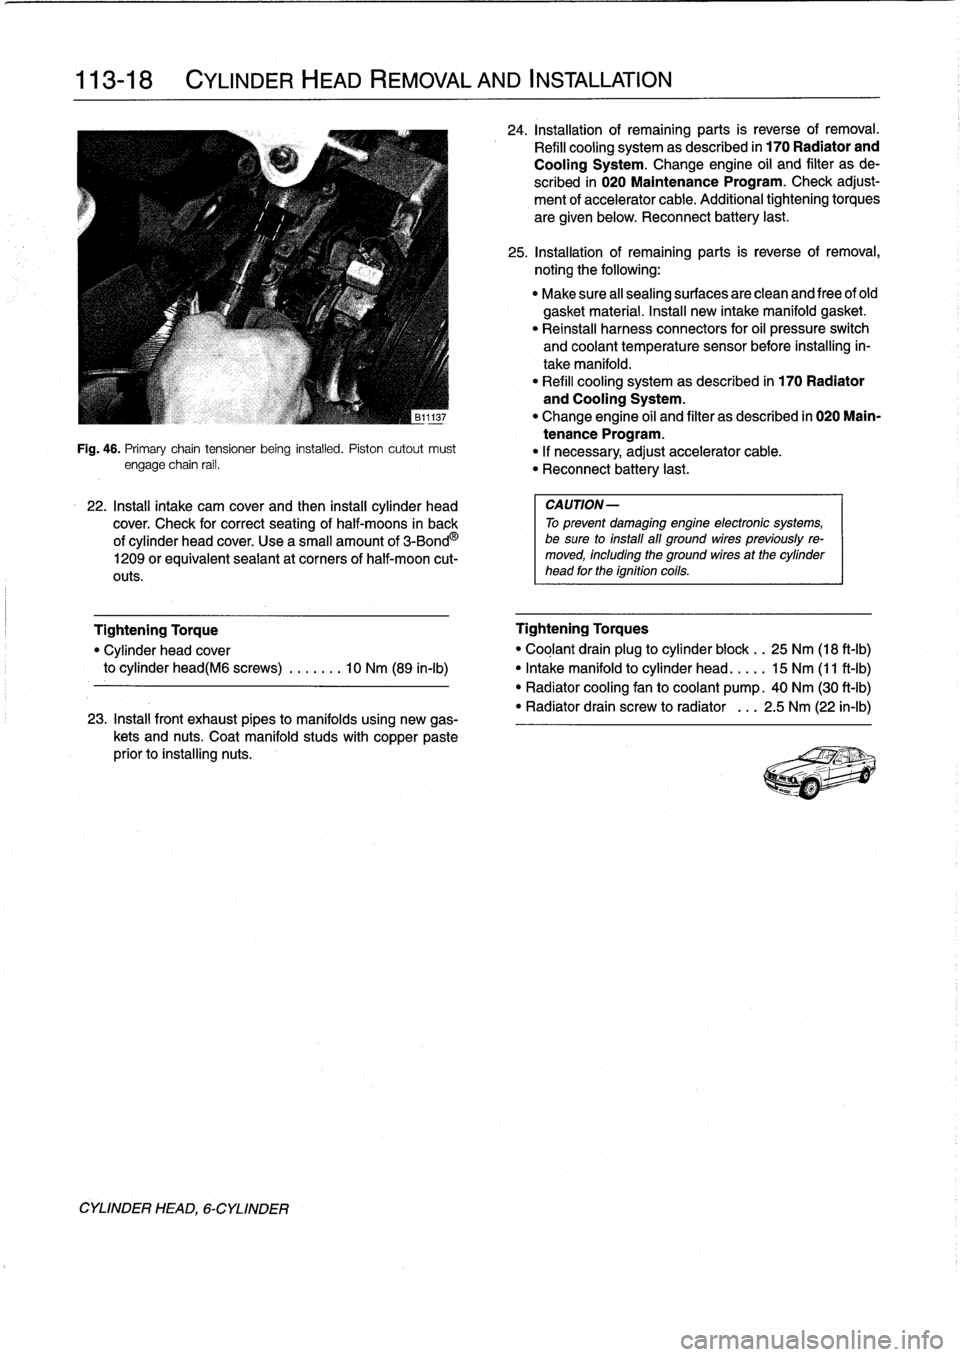 BMW 323i 1995 E36 Workshop Manual 
113-
1
8

	

CYLINDER
HEAD
REMOVAL
AND
INSTALLATION

CYLINDER
HEAD,
6-CYLINDER

Fig
.
46
.
Primary
chaintensioner
being
installed
.
Piston
cutout
must
engage
chain
rail
.

22
.
Install
intake
cam
cov